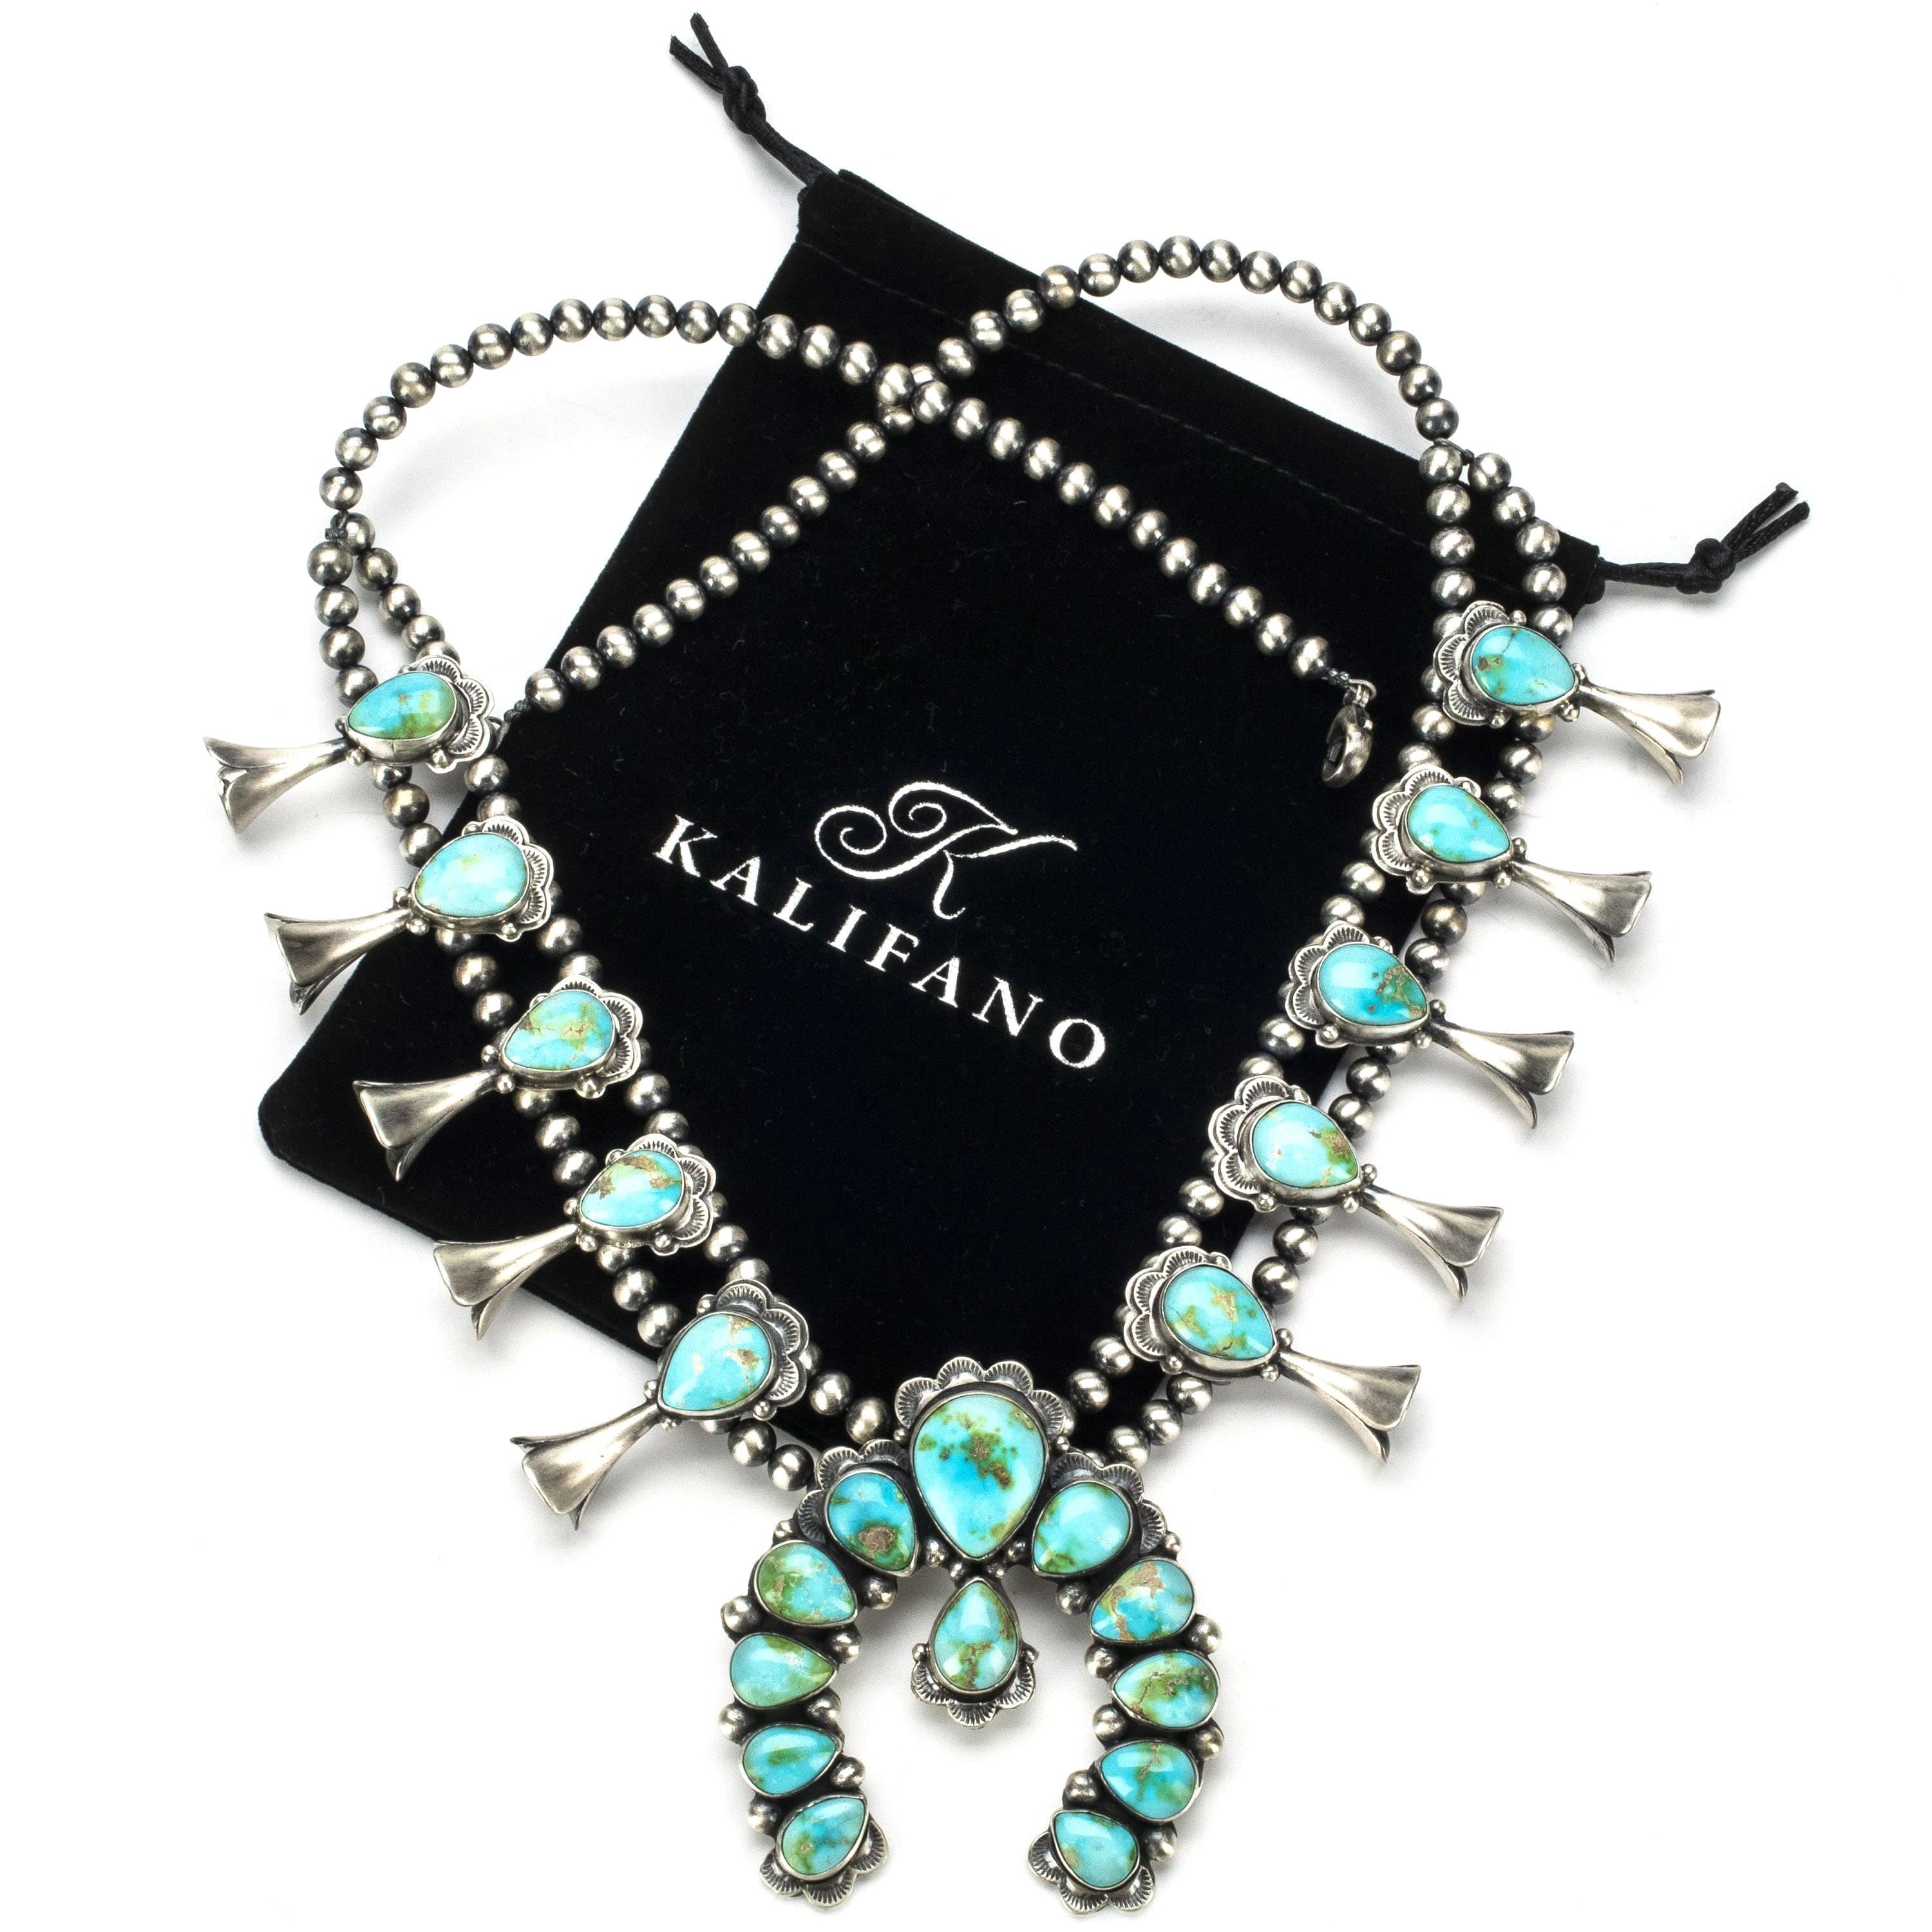 Kalifano Native American Jewelry Danny Clark Sonoran Gold Turquoise Squash Blossom USA Native American Made 925 Sterling Silver Necklace NAN12000.001